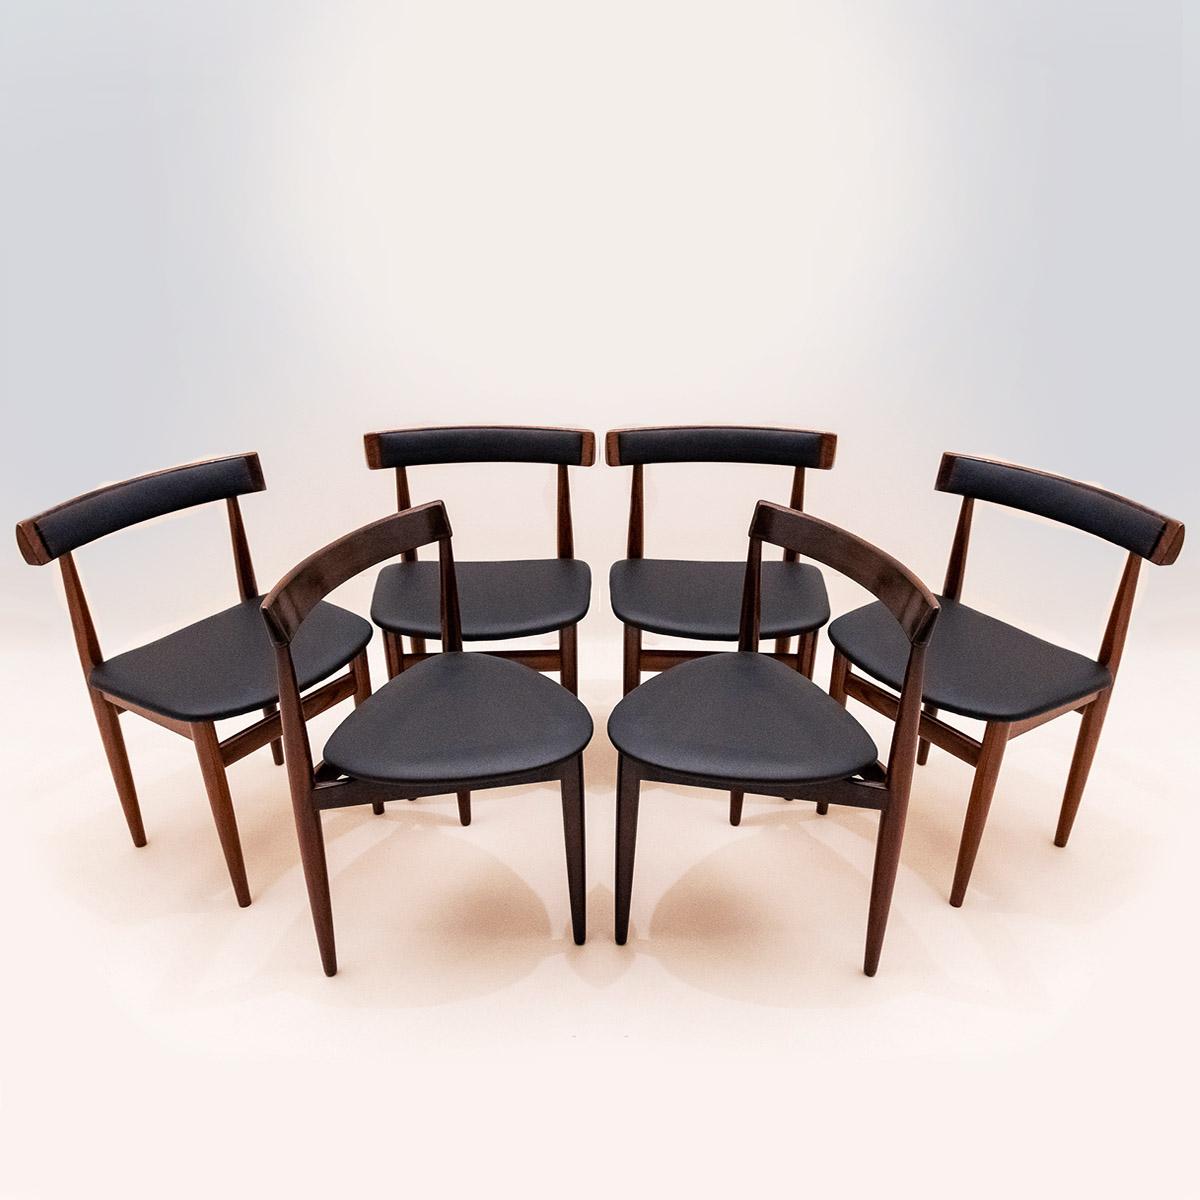 Danish Mid Century Hans Olsen Roundette Dining Set with 6 Chairs by Frem Røjle 1